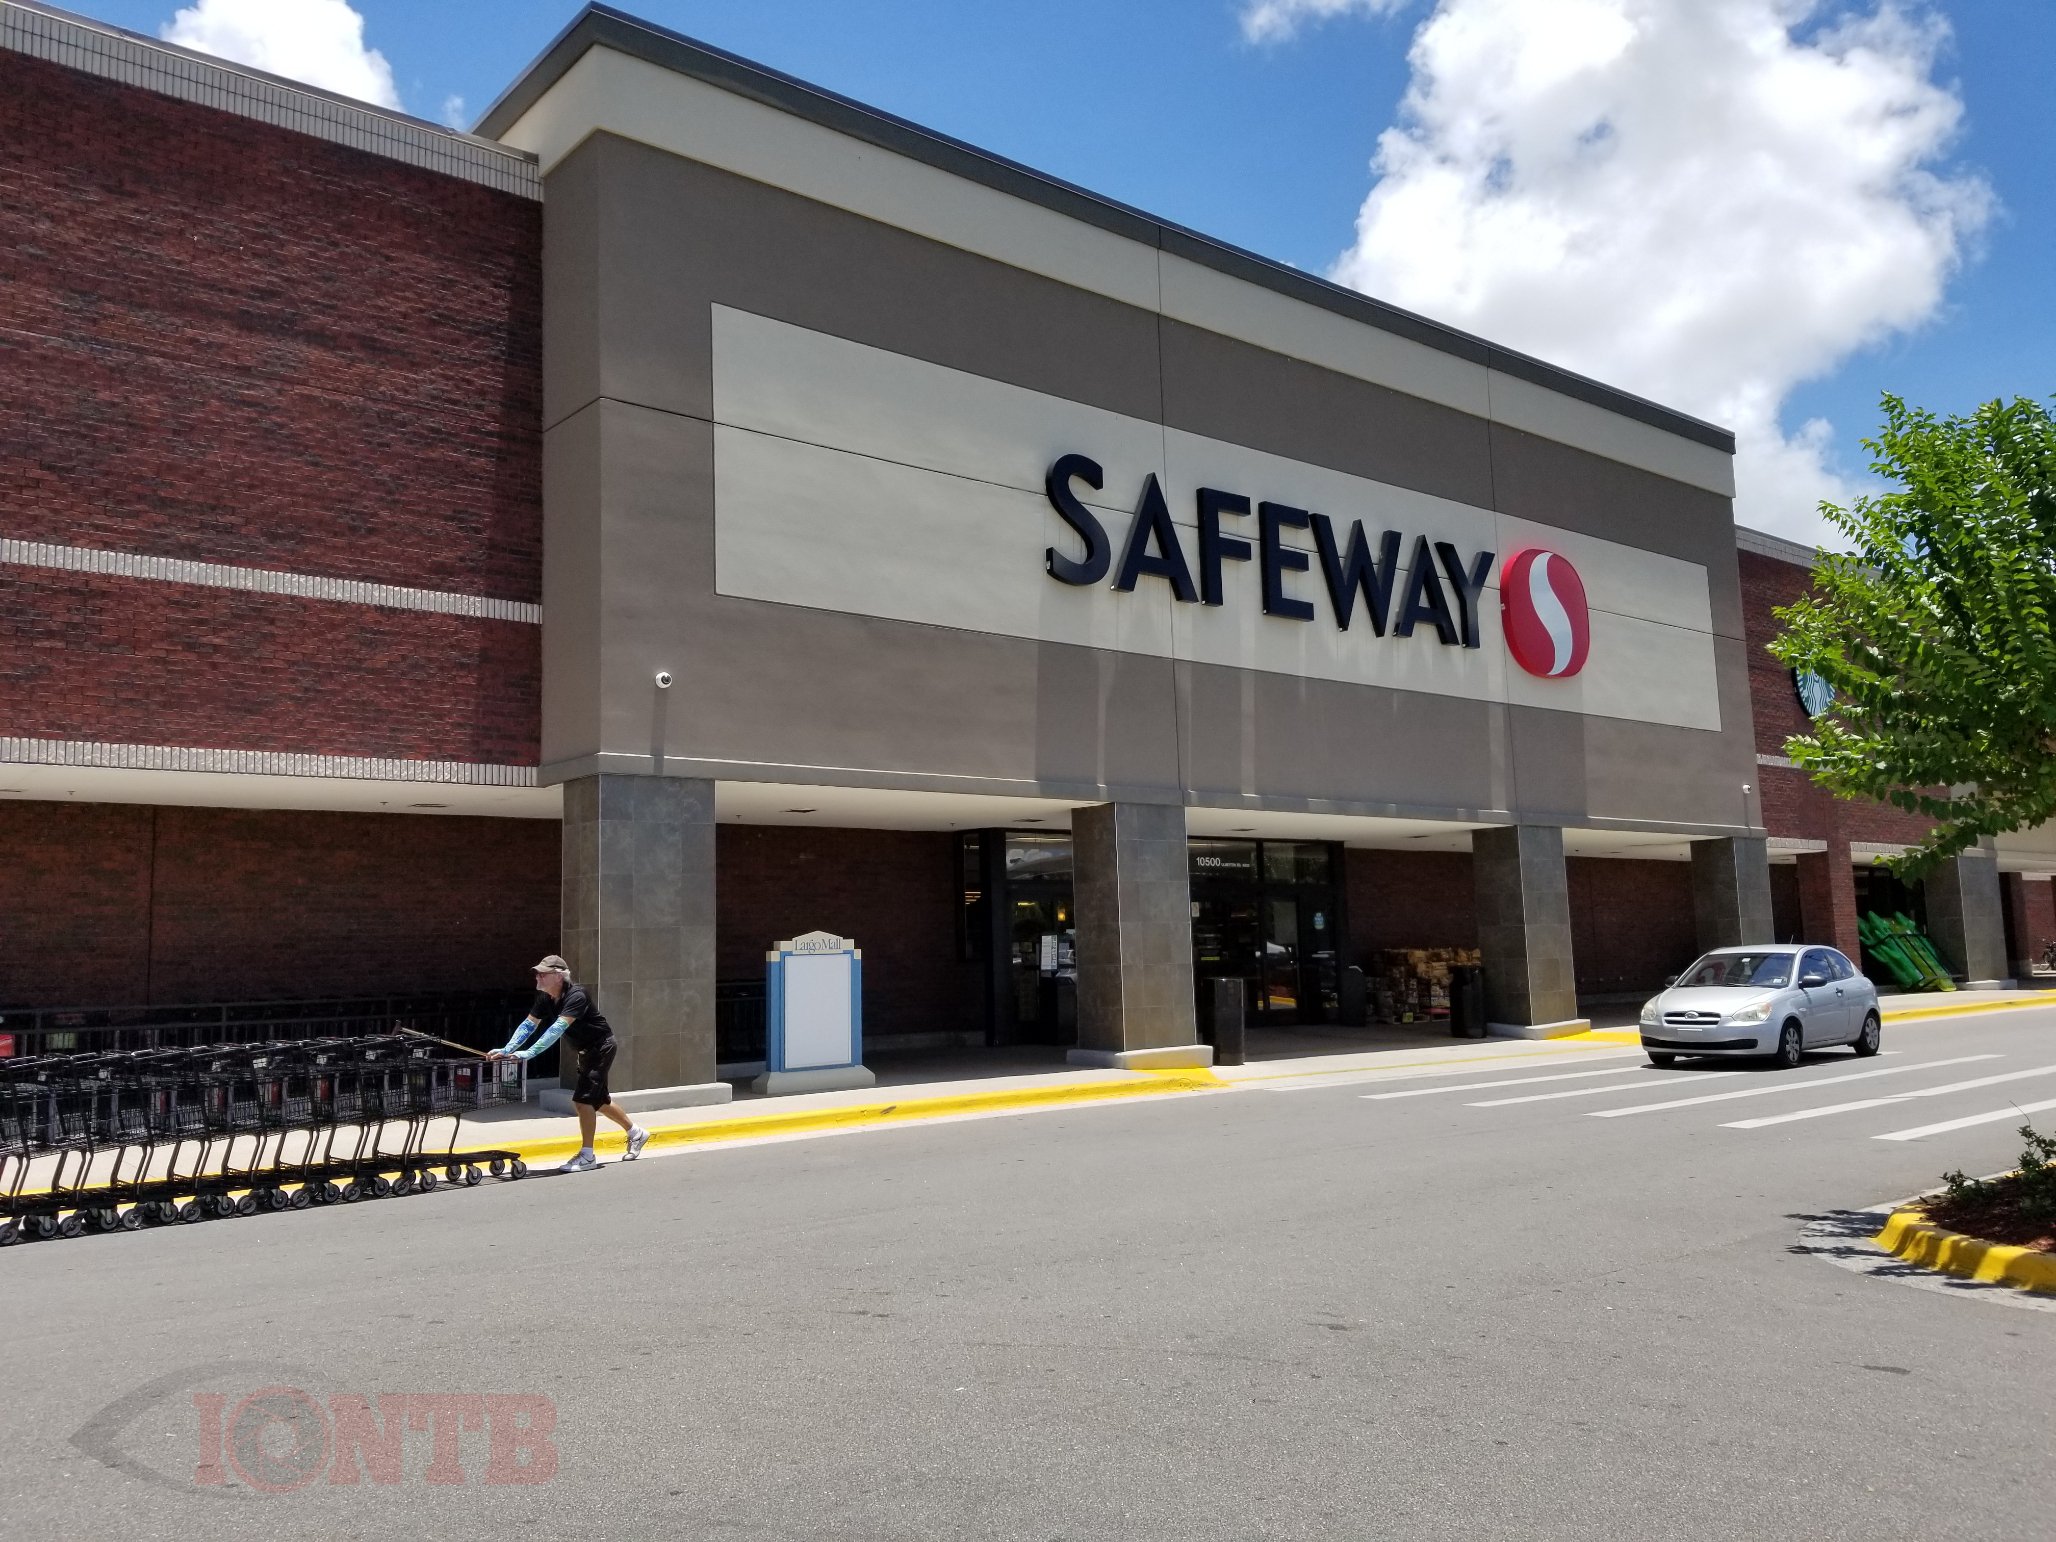 Safeway Grocery Stores to Close All Florida Stores Including Largo Mall